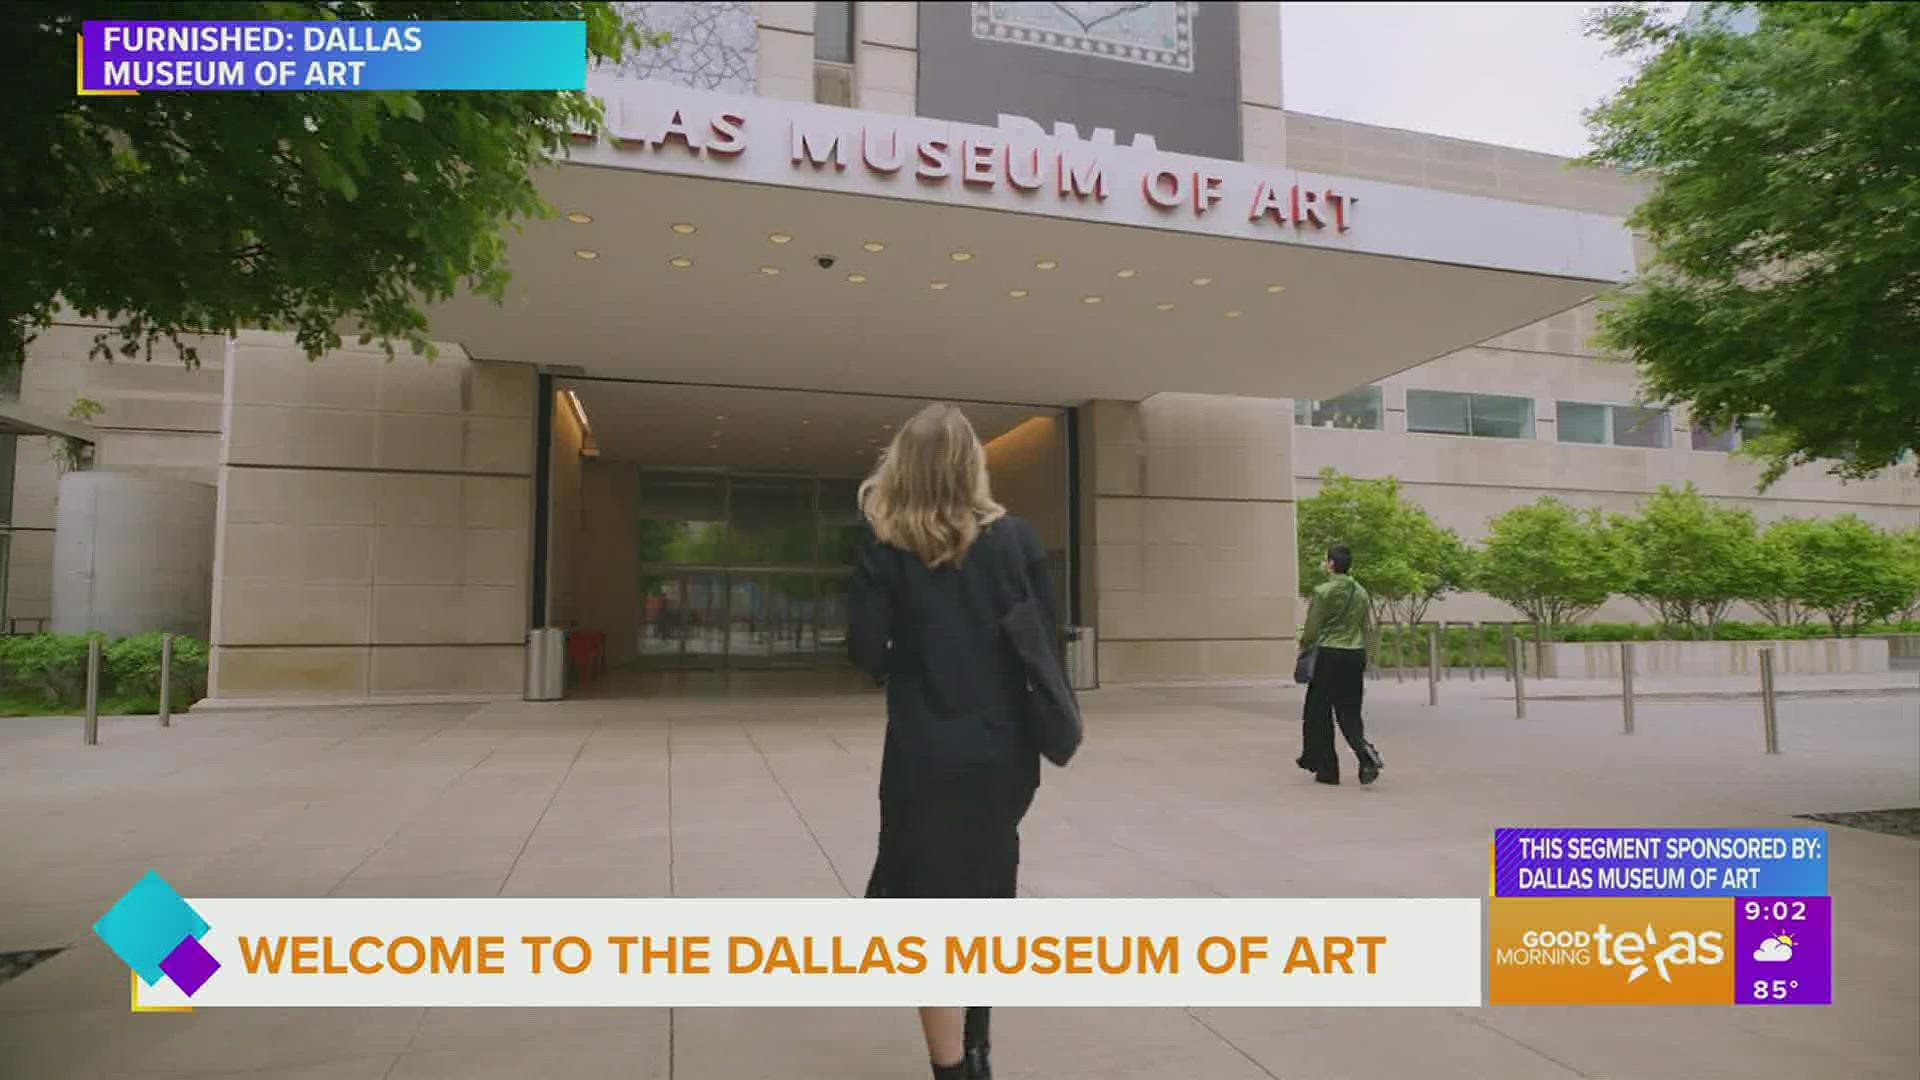 This segment is sponsored by the Dallas Museum of Art.